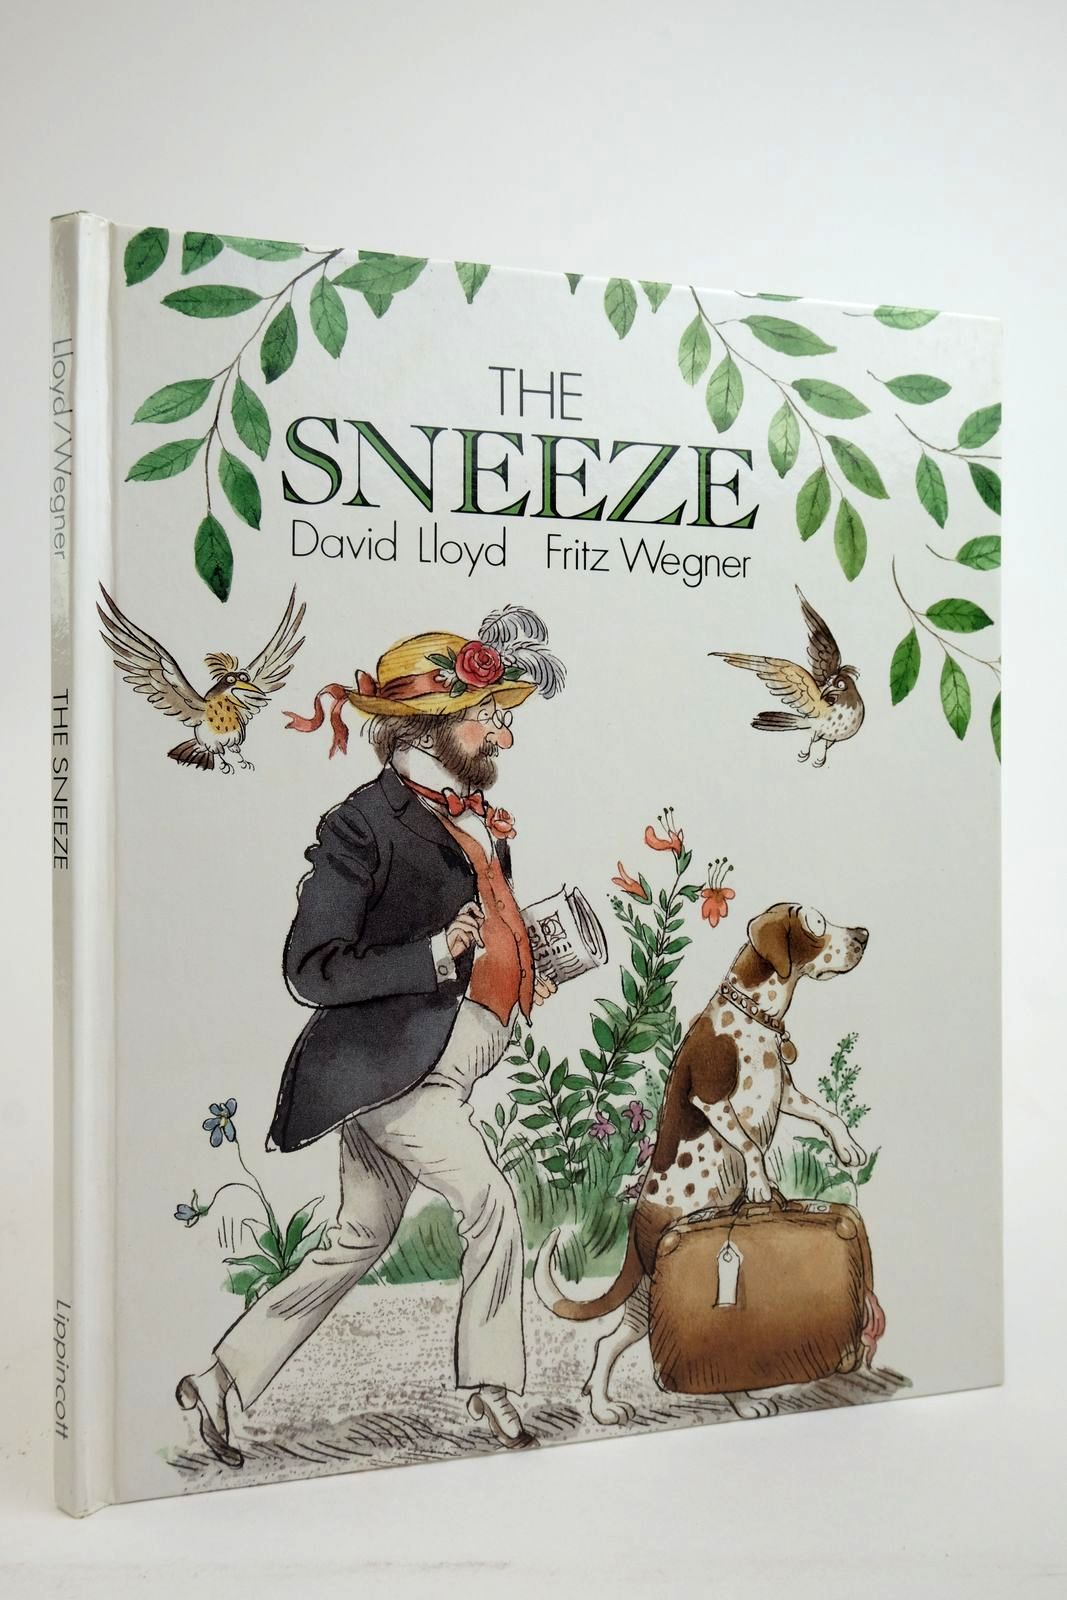 Photo of THE SNEEZE written by Lloyd, David illustrated by Wegner, Fritz published by J.B. Lippincott (STOCK CODE: 2135578)  for sale by Stella & Rose's Books